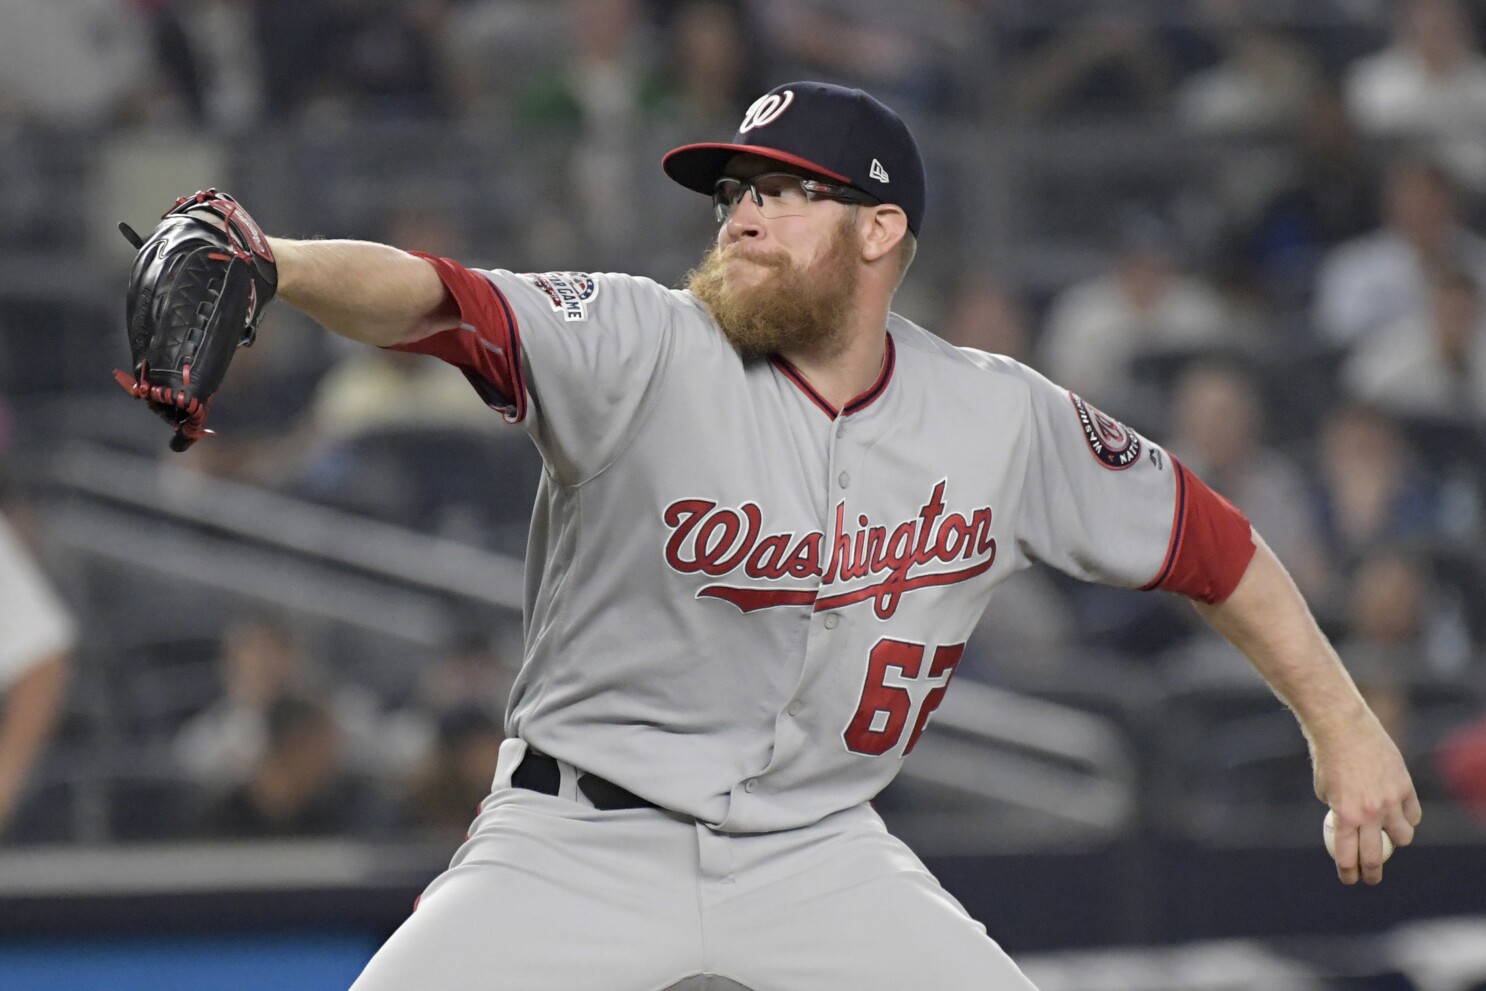 Off the Mound, Sean Doolittle Brings Relief to the Ostracized